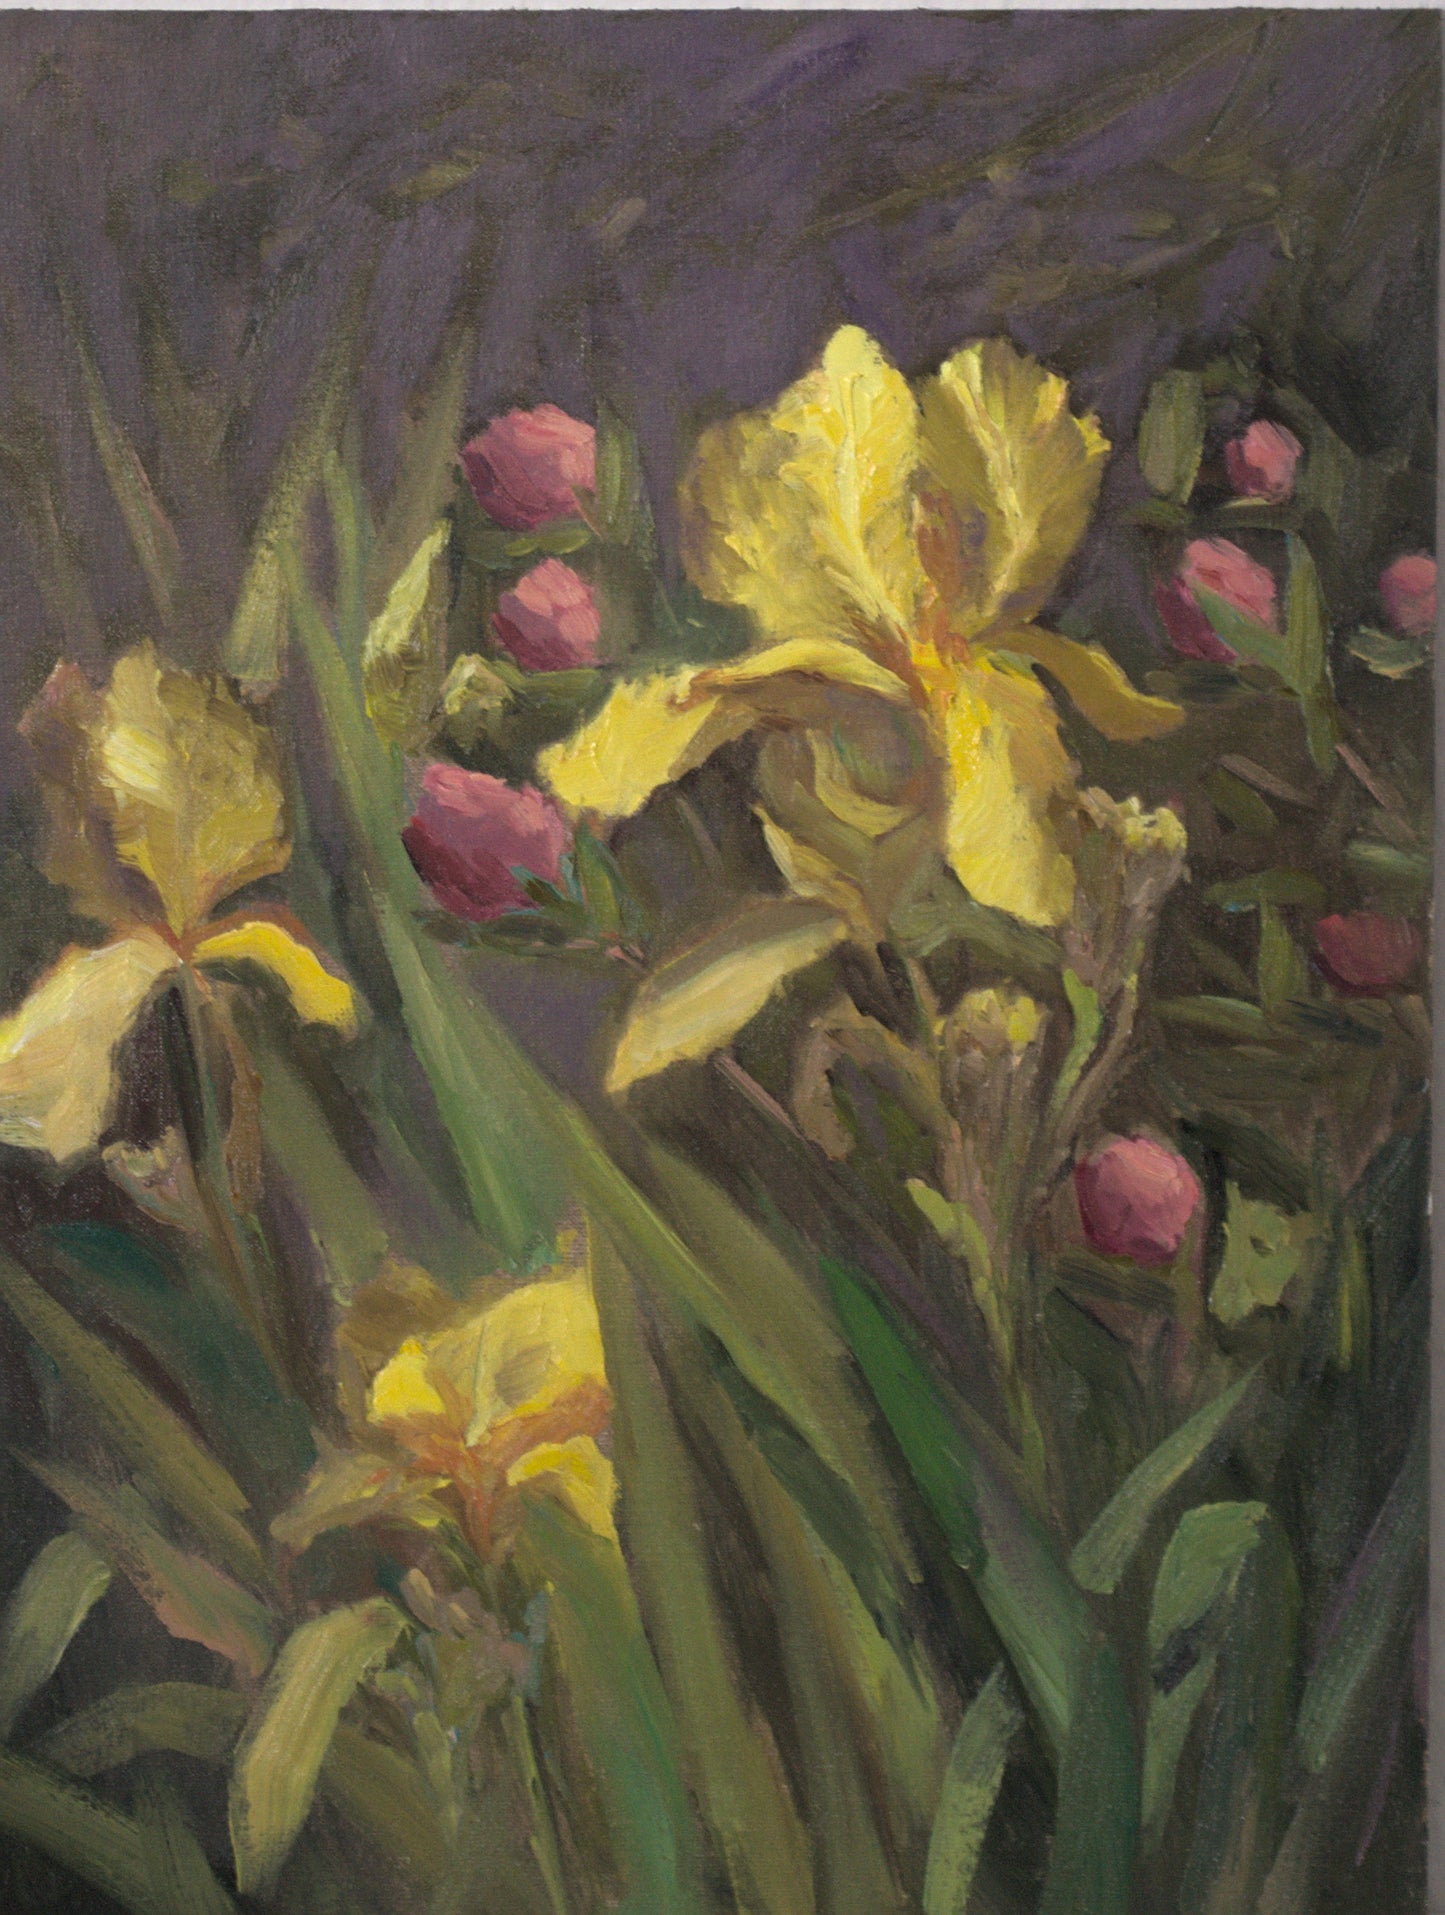 Irises and Peony buds - Oil Painting, 12 by 16 inches